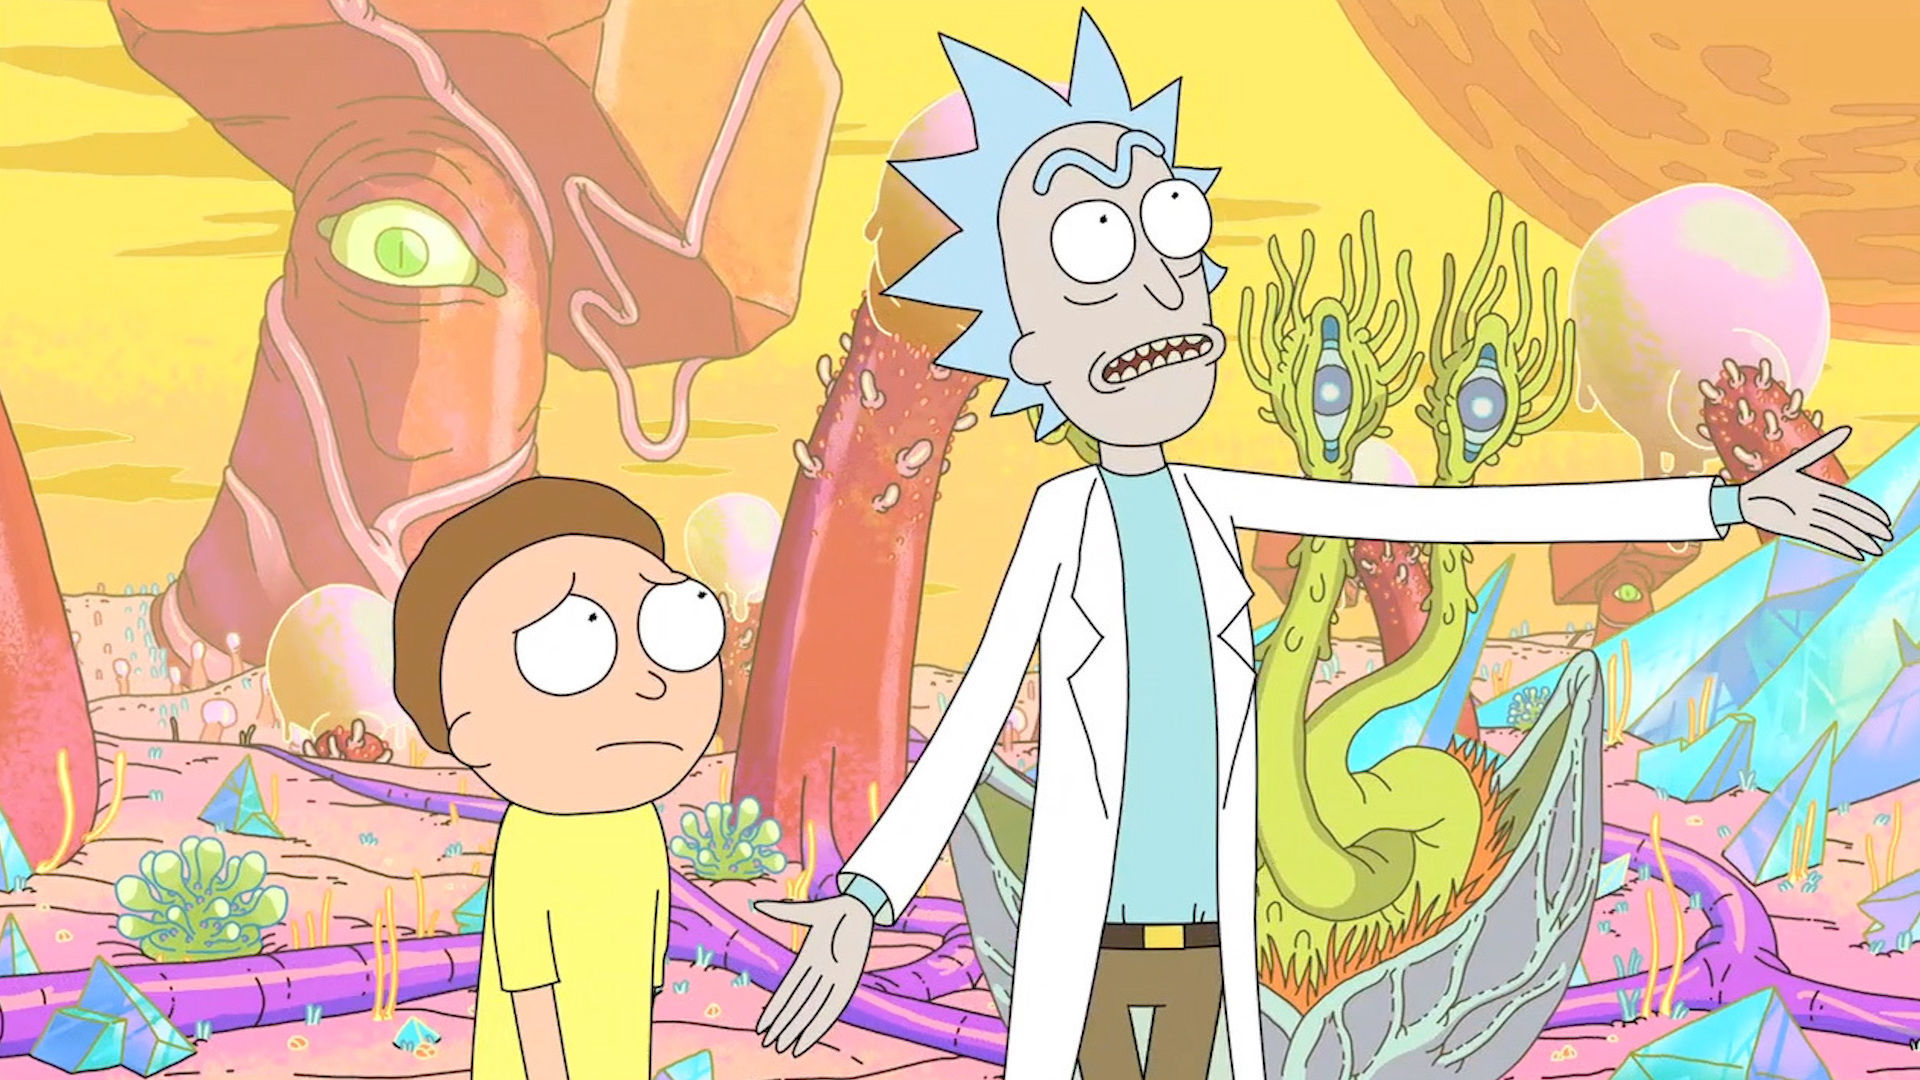 Rick and Morty season 7 release date, cast and more